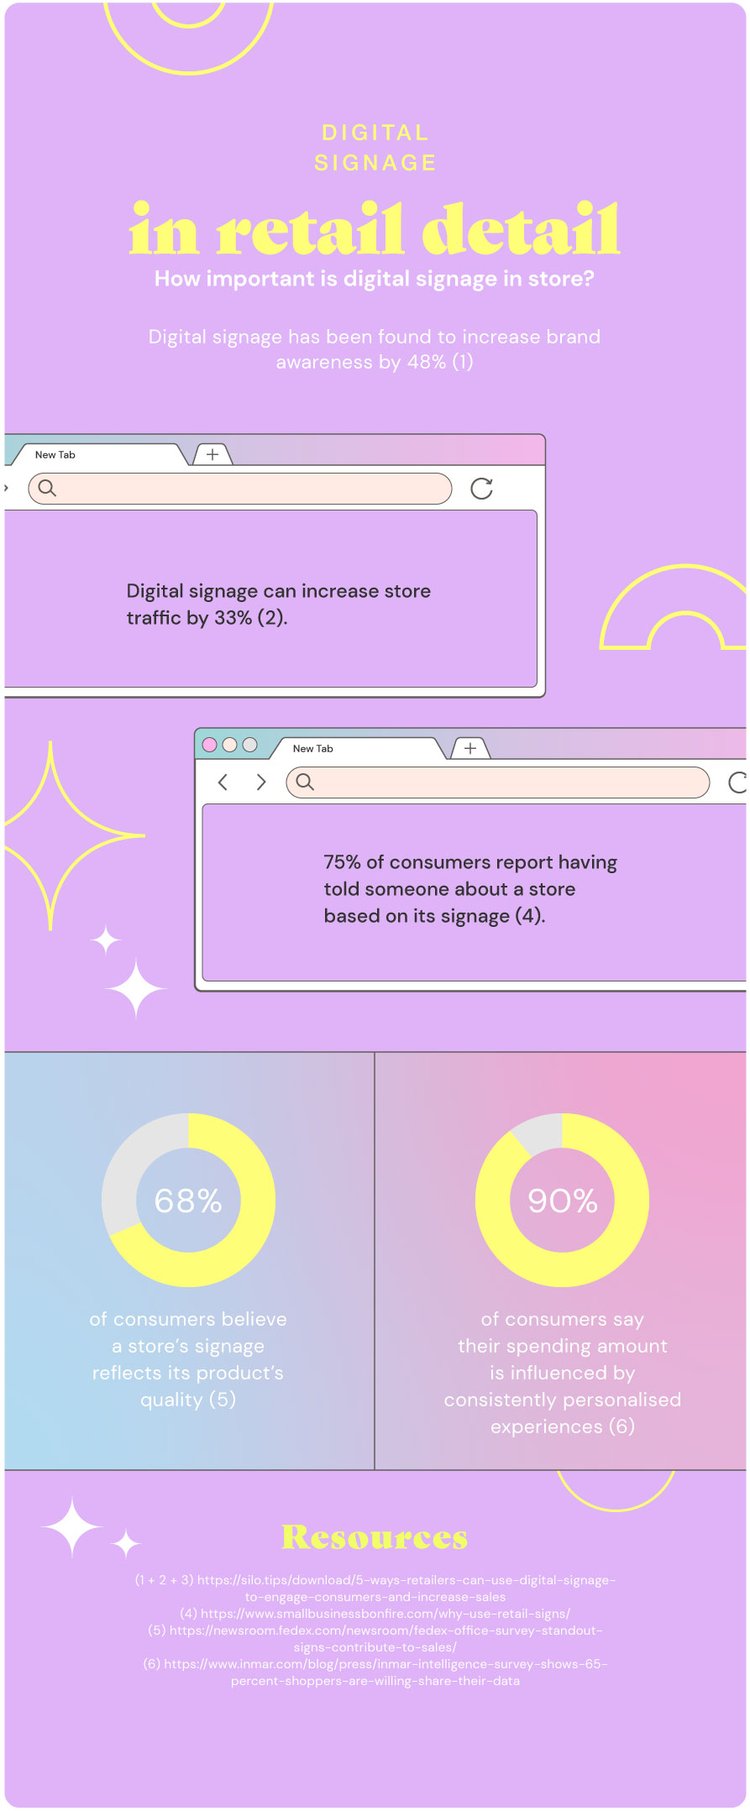 How-important-is-digital-signage-instore-infographic